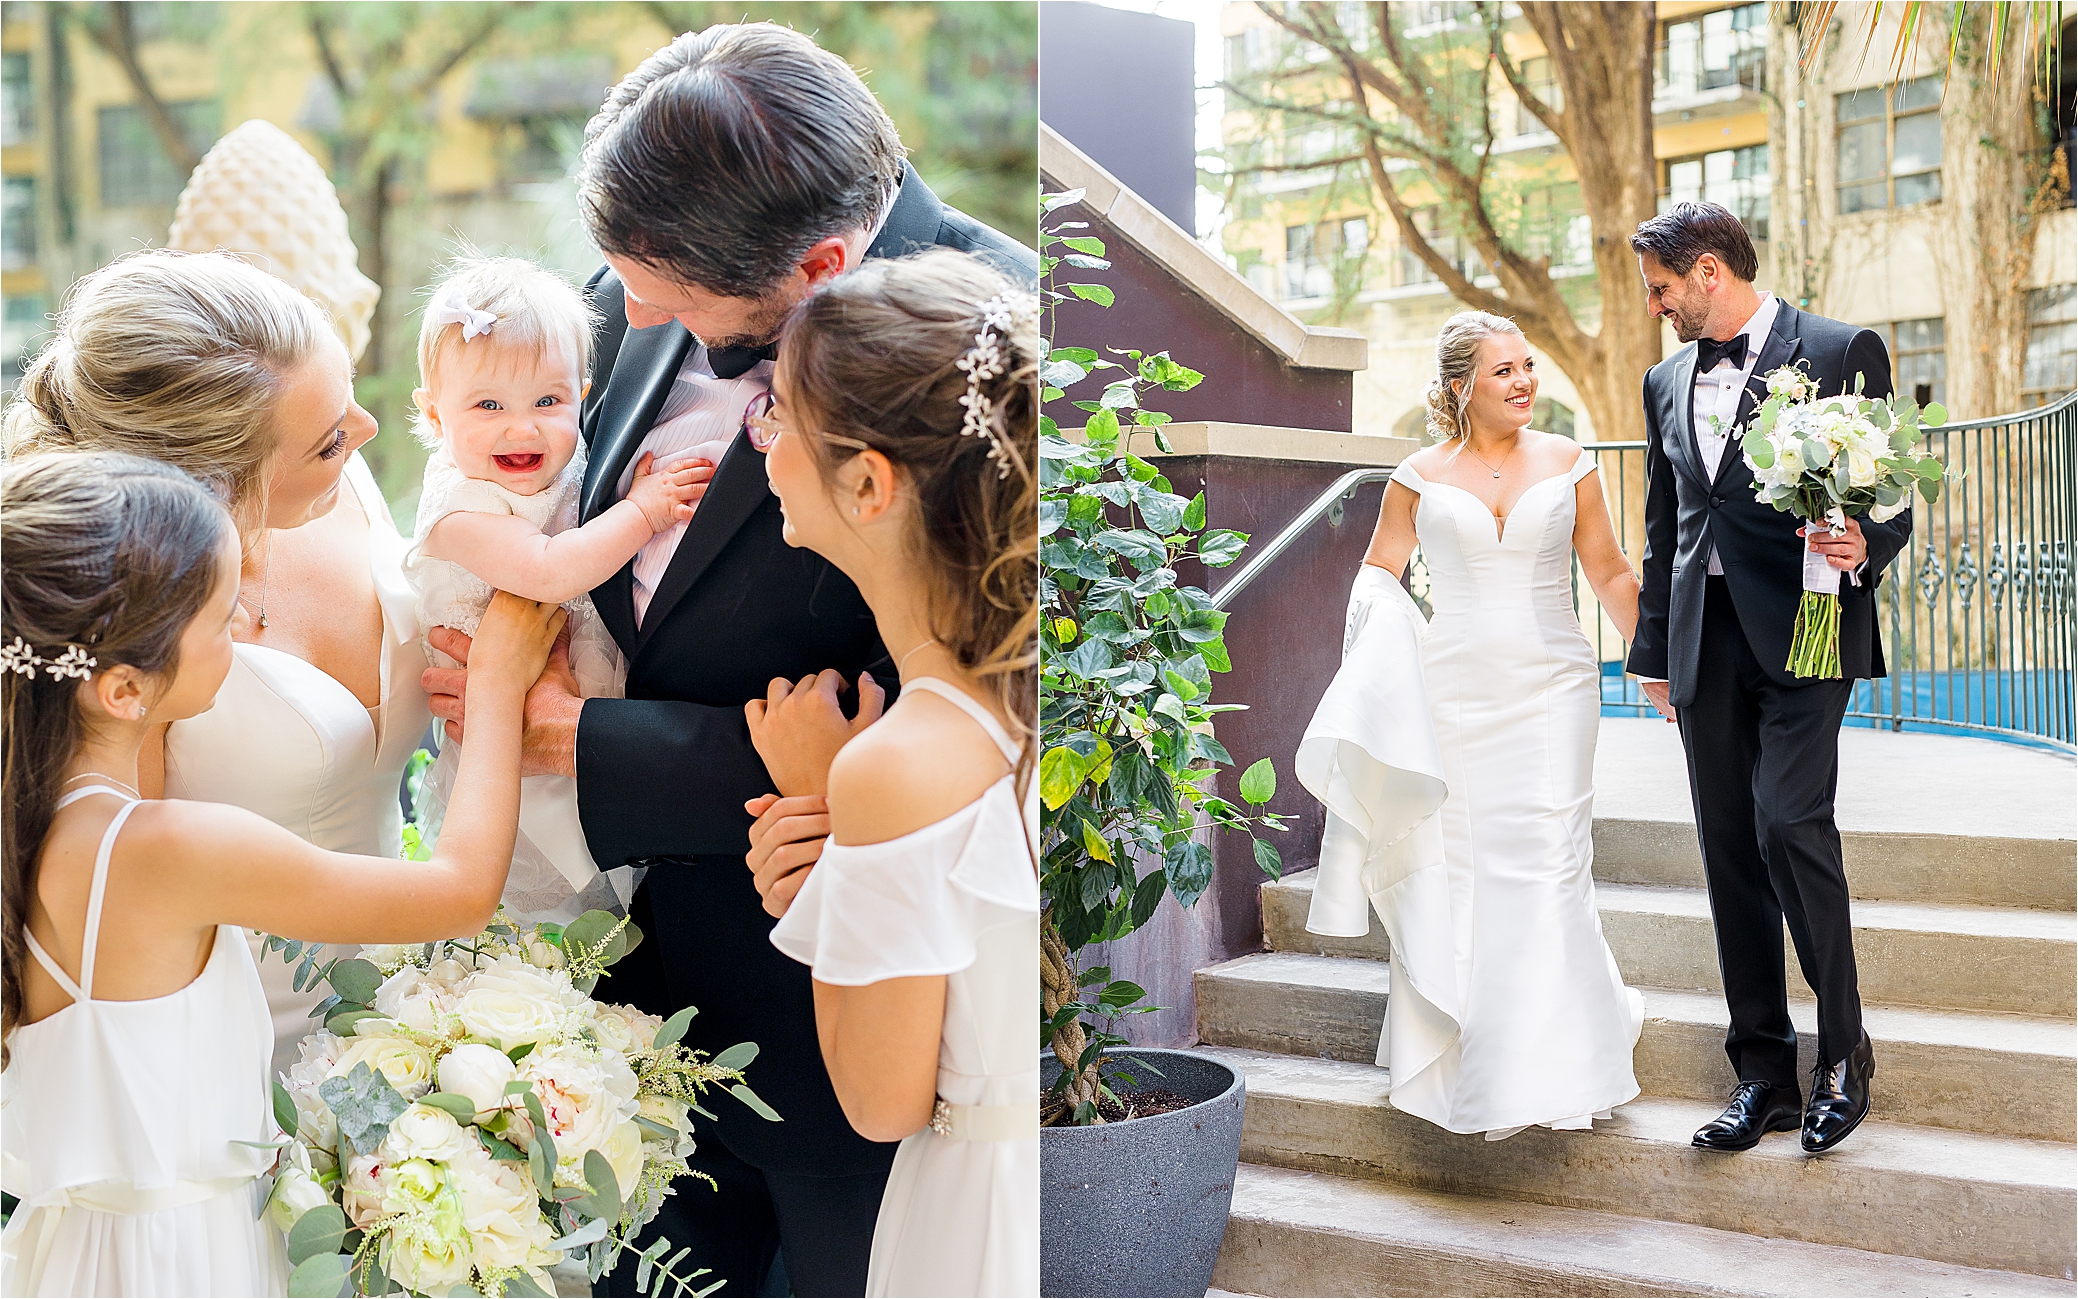 A family loves on their new baby on their wedding day at The Hotel Valenica in San Antonio, Texas 